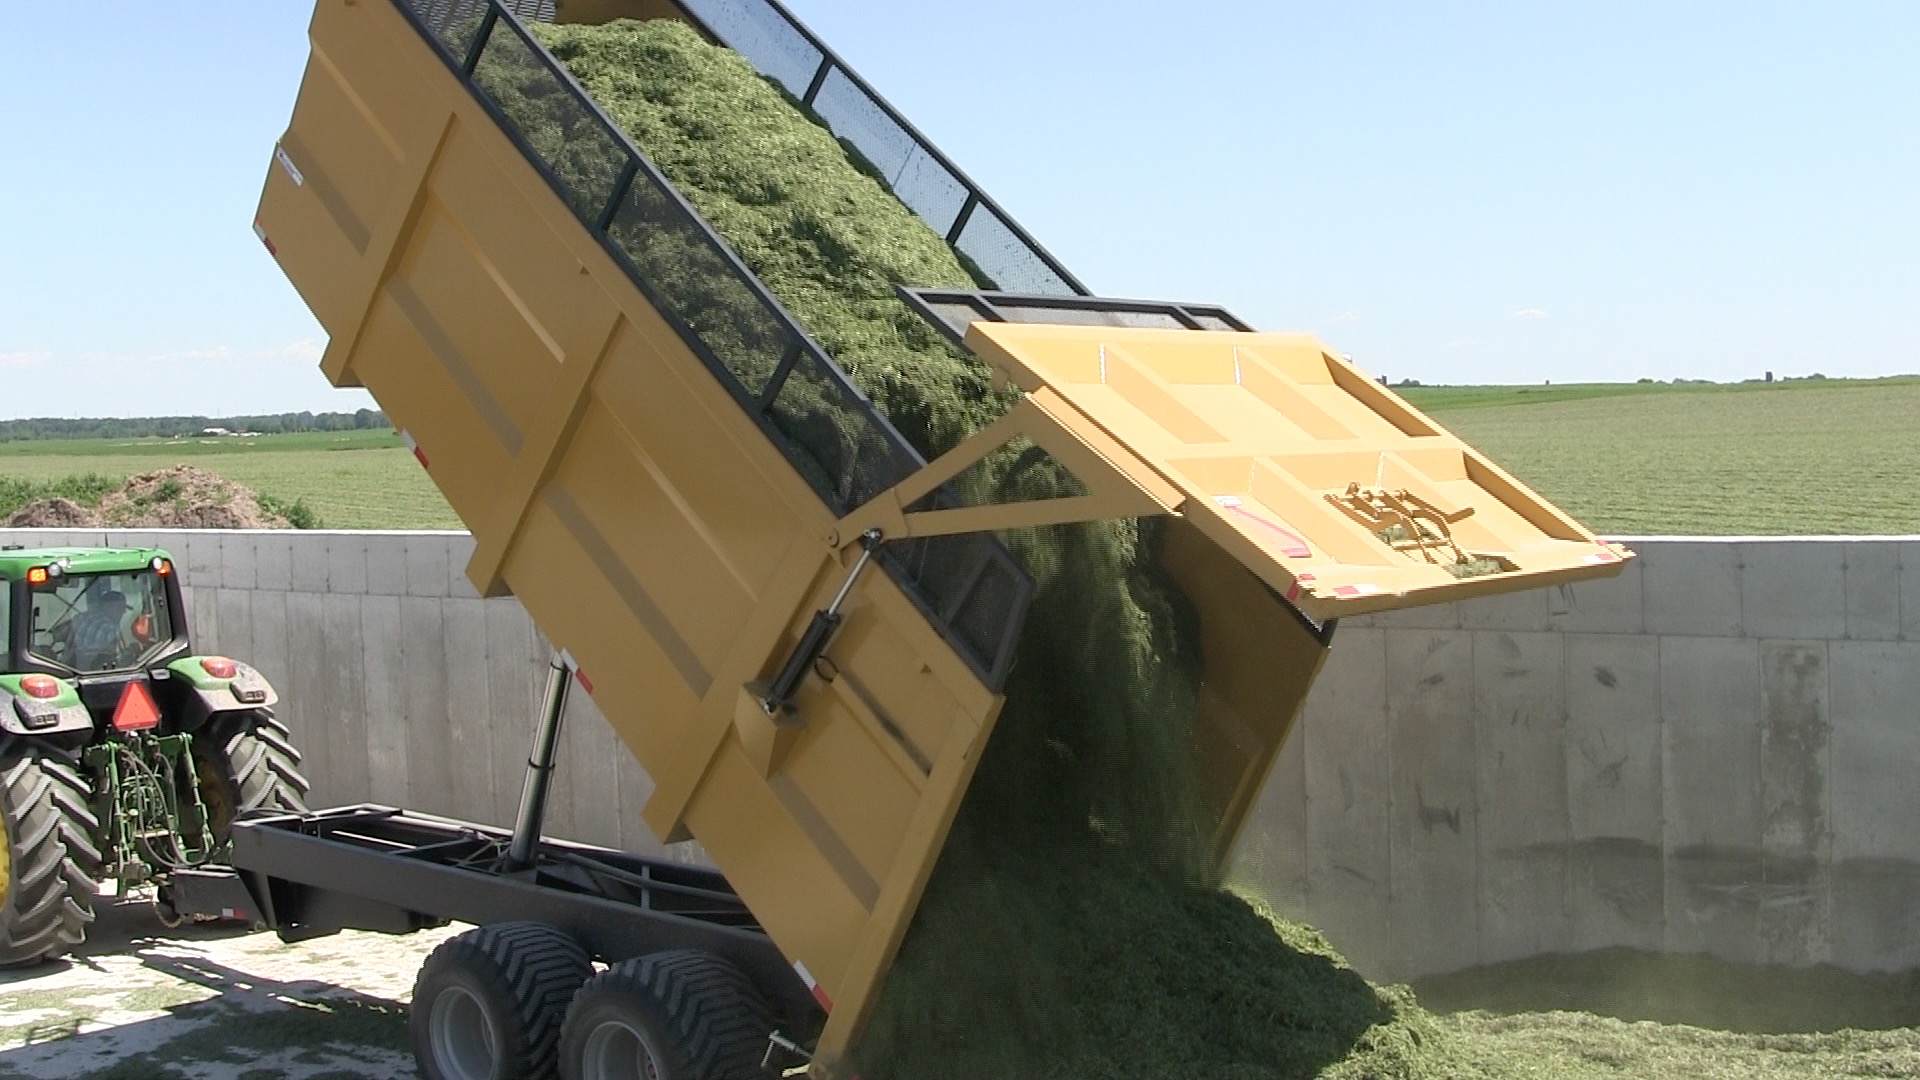 An image of the 20 ton silage dumpster trailer dumping hay silage